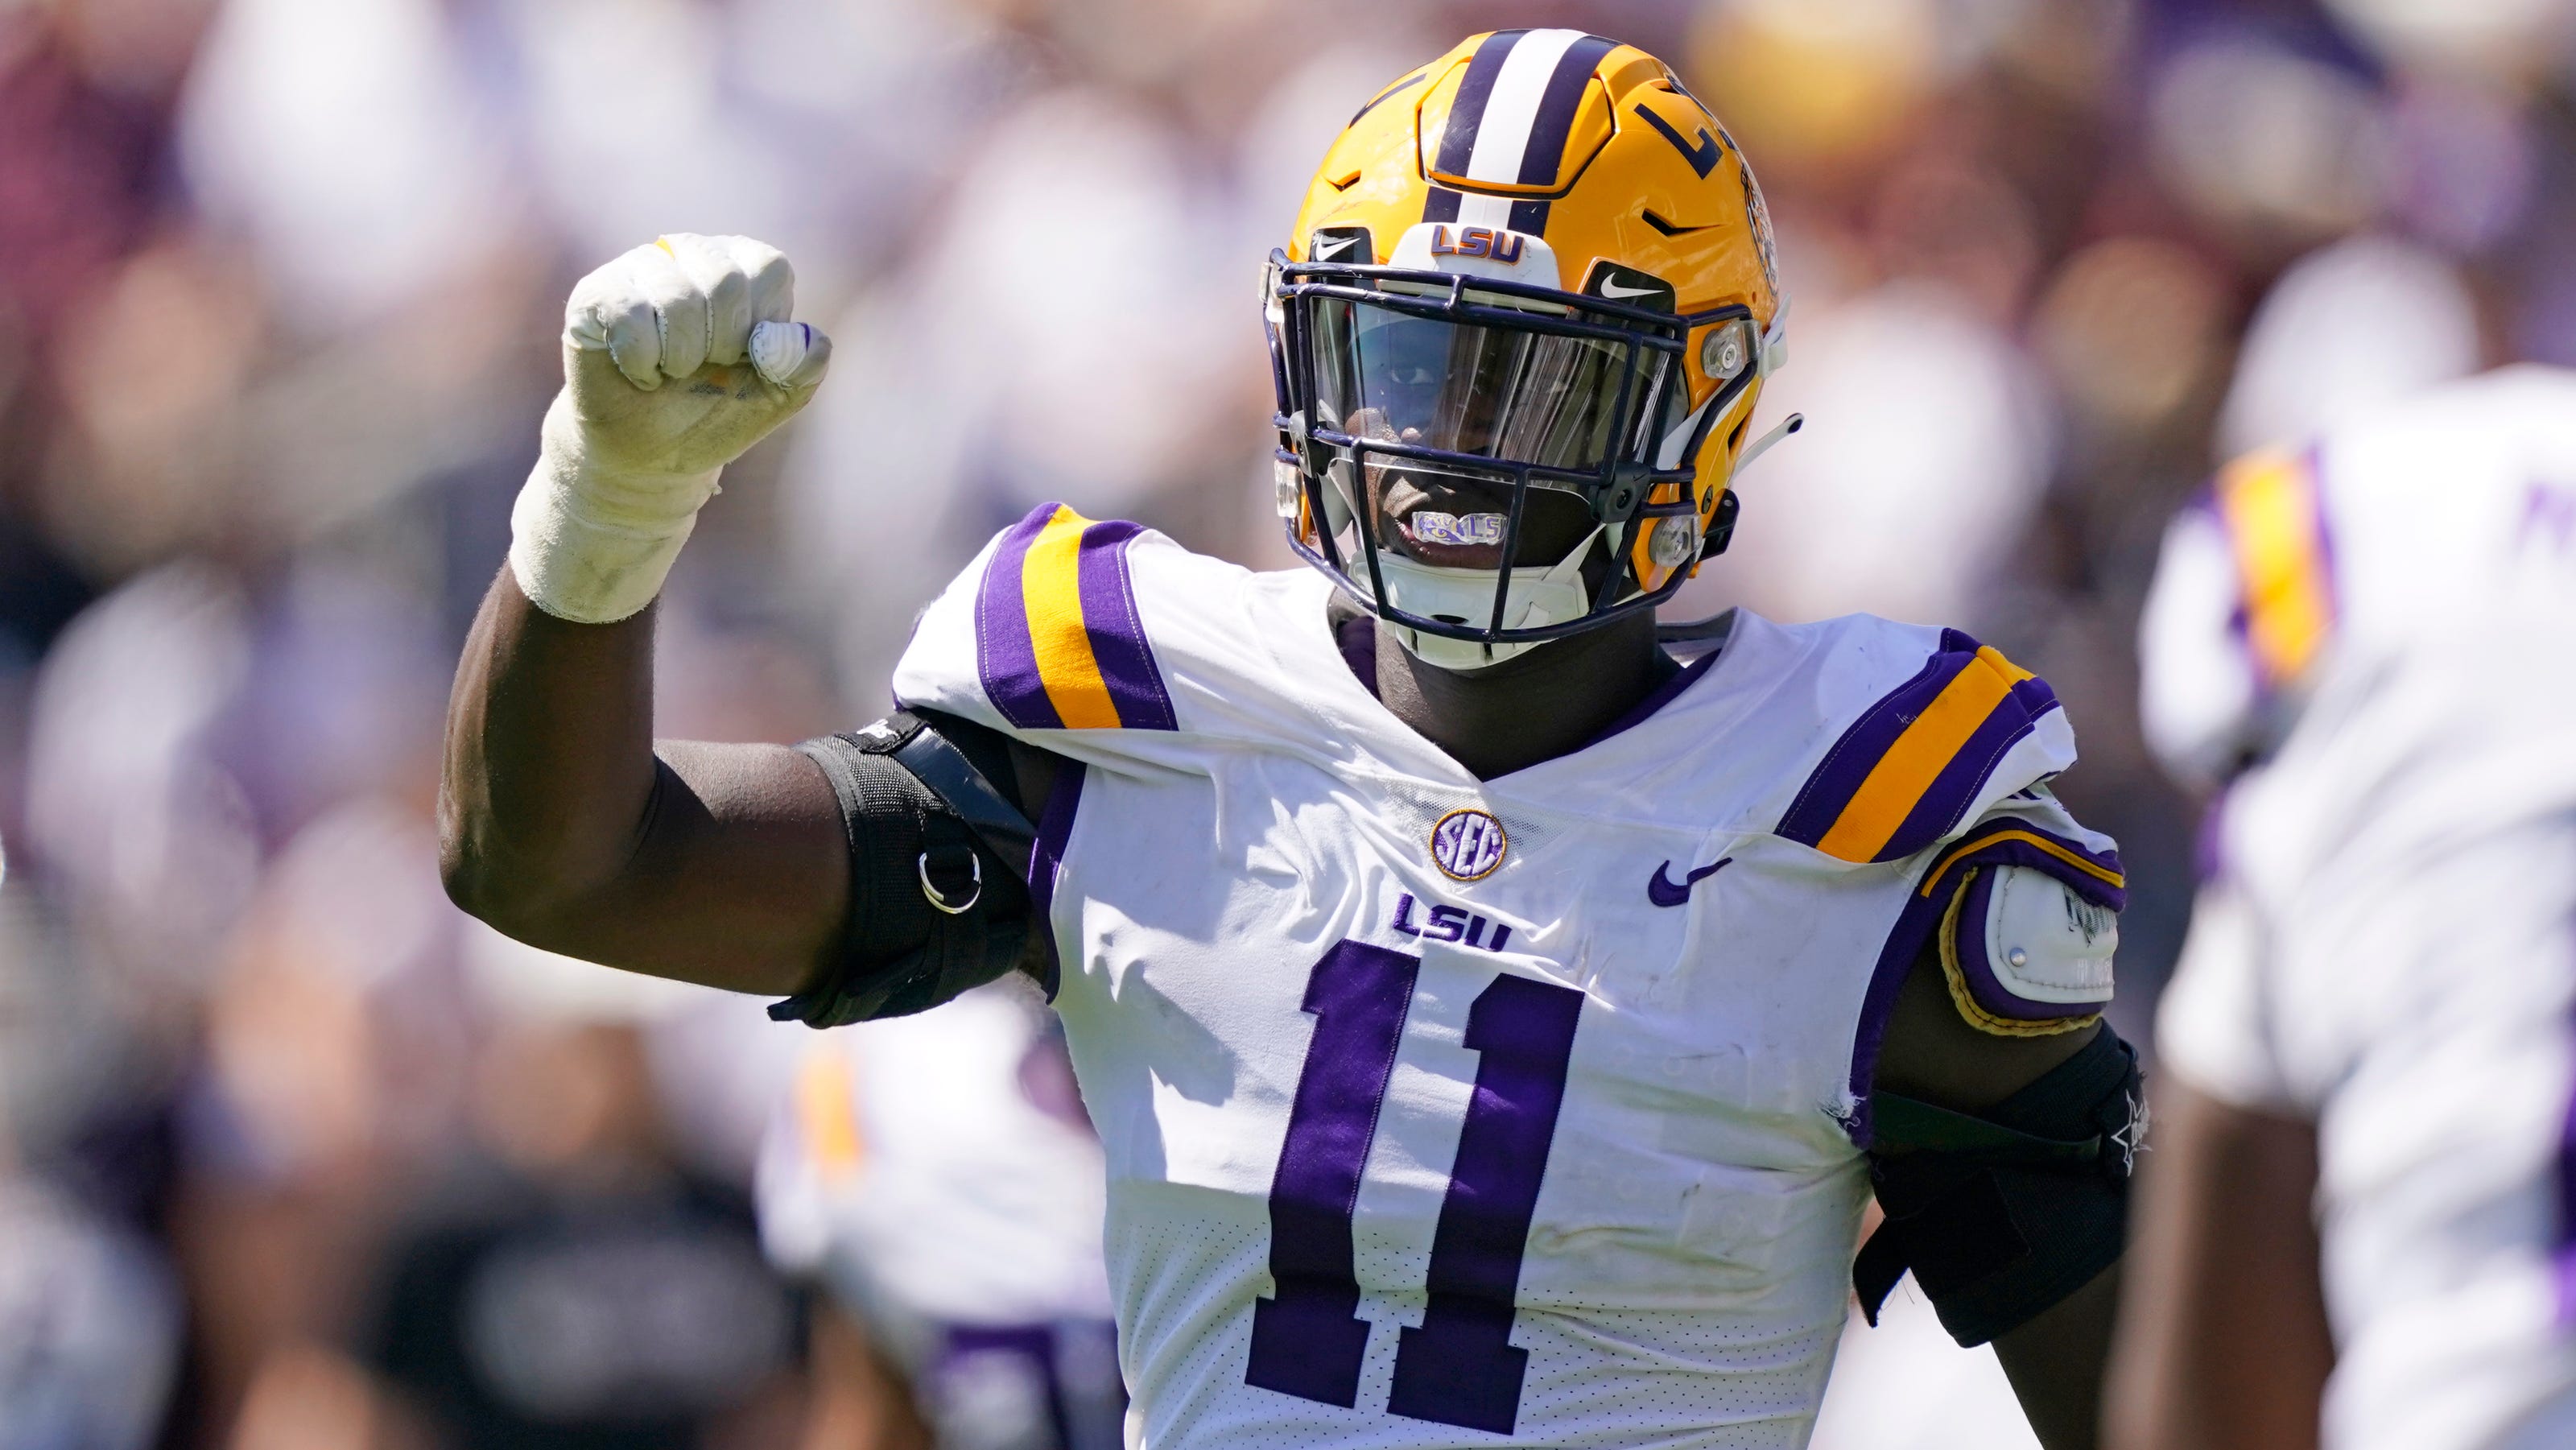 LSU football's Ali Gaye reached out to FSU QB after targeting call